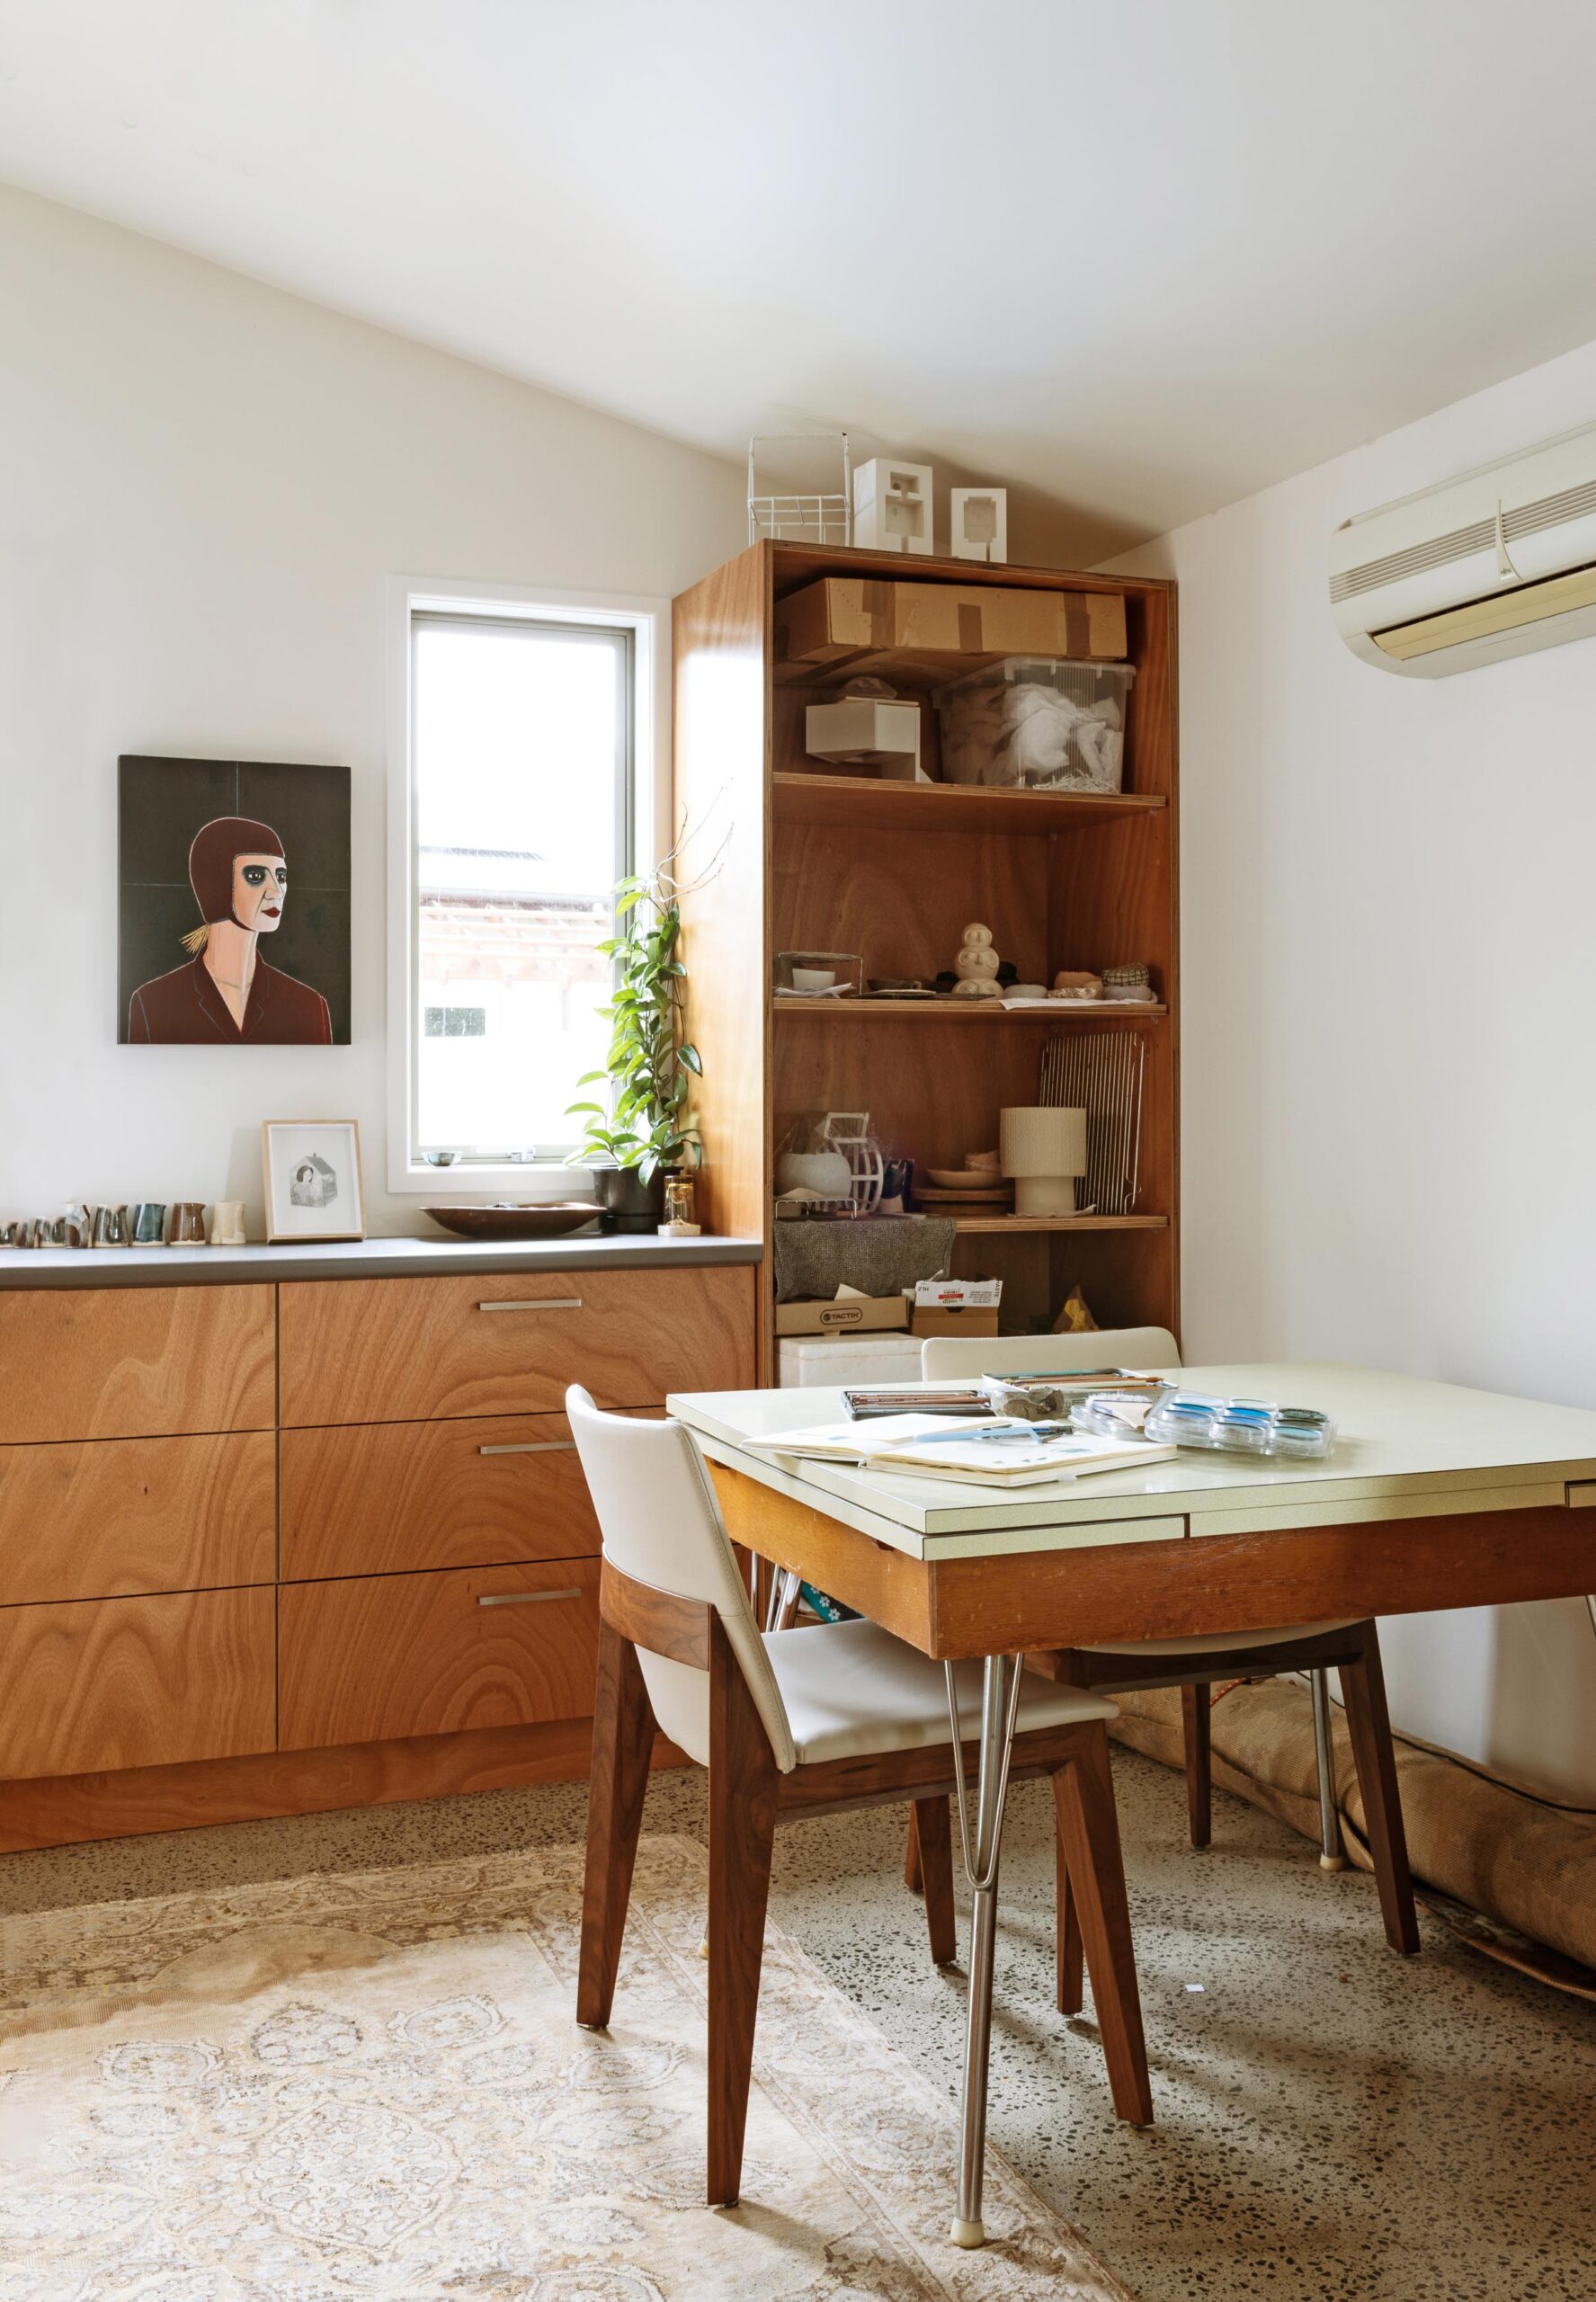 A workspace with cabinets and a workspace along the back wall and a formica table sitting in front